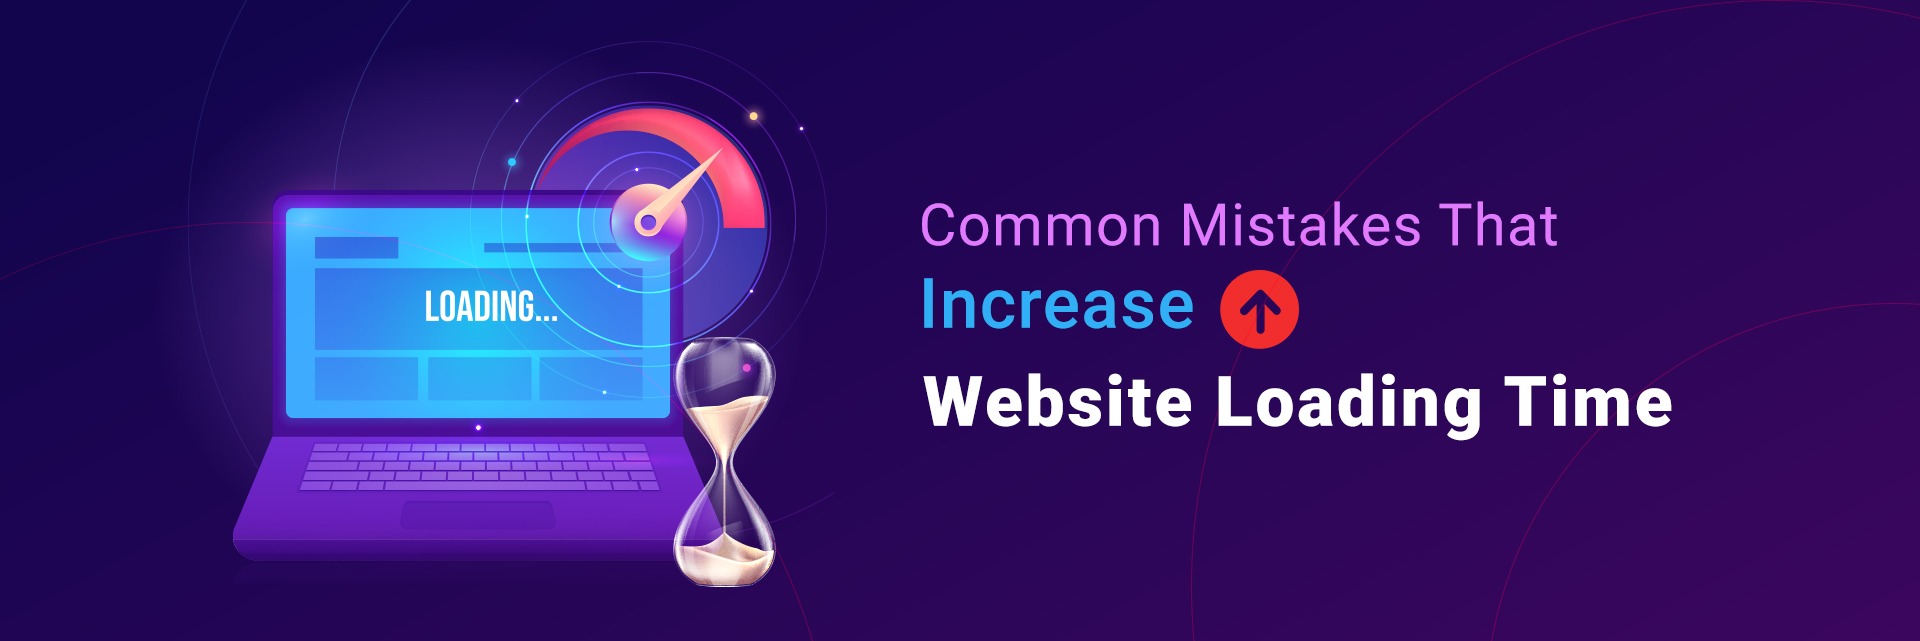 Common Mistakes That Increase Website Loading Time